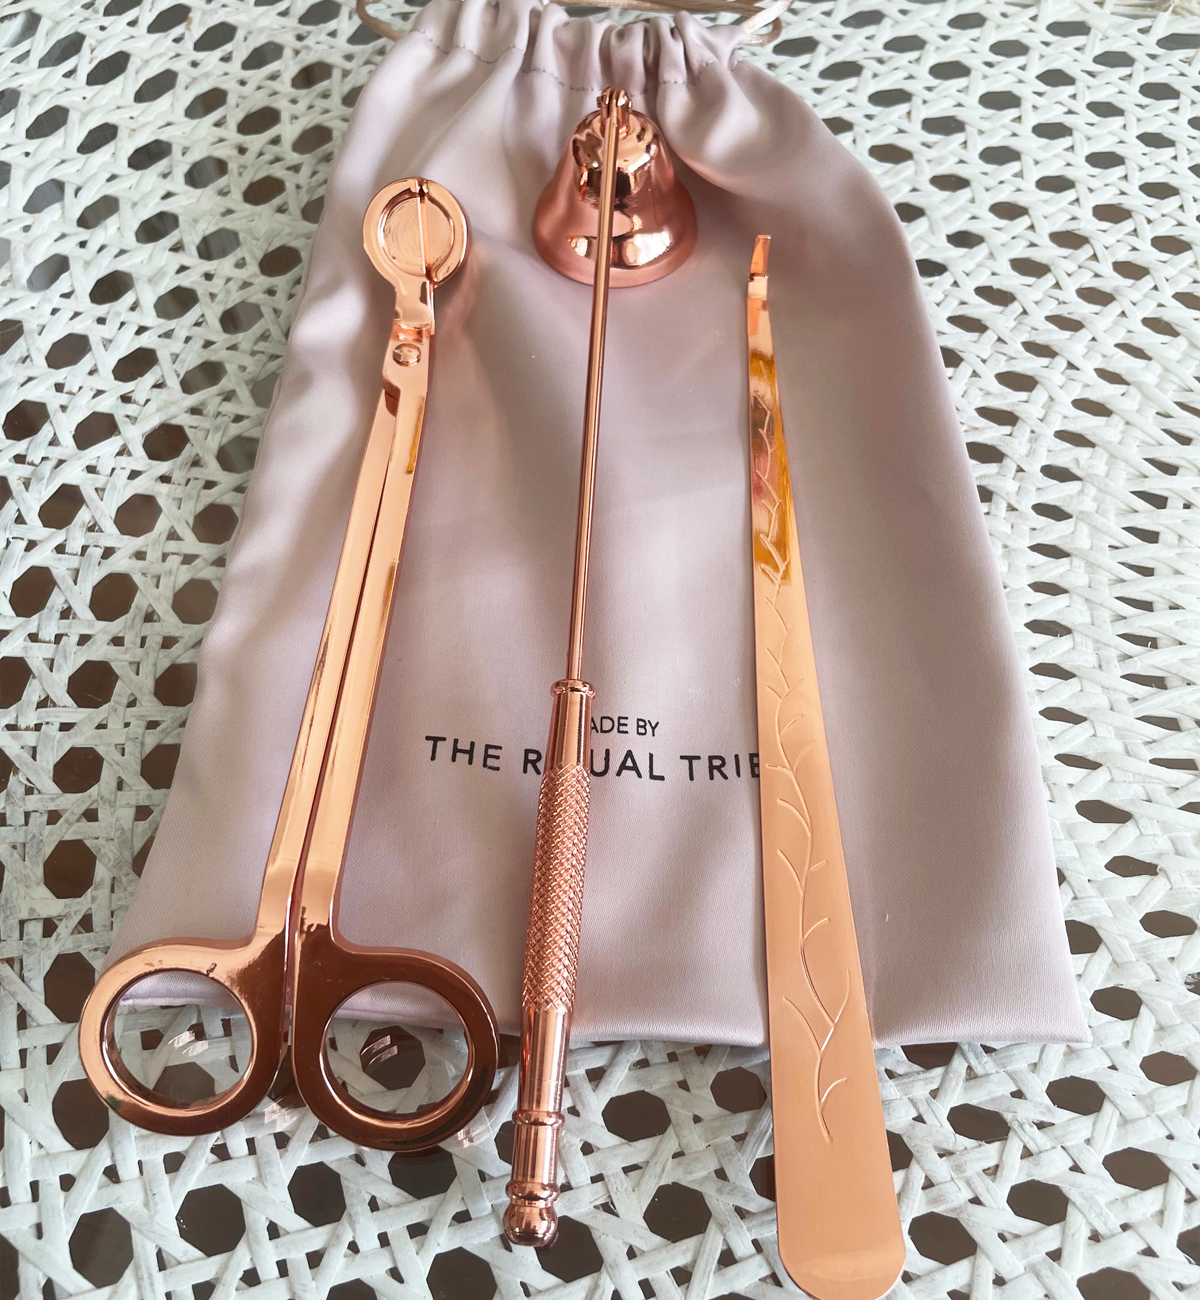 Four Piece Rose Gold Candle Tool Kit